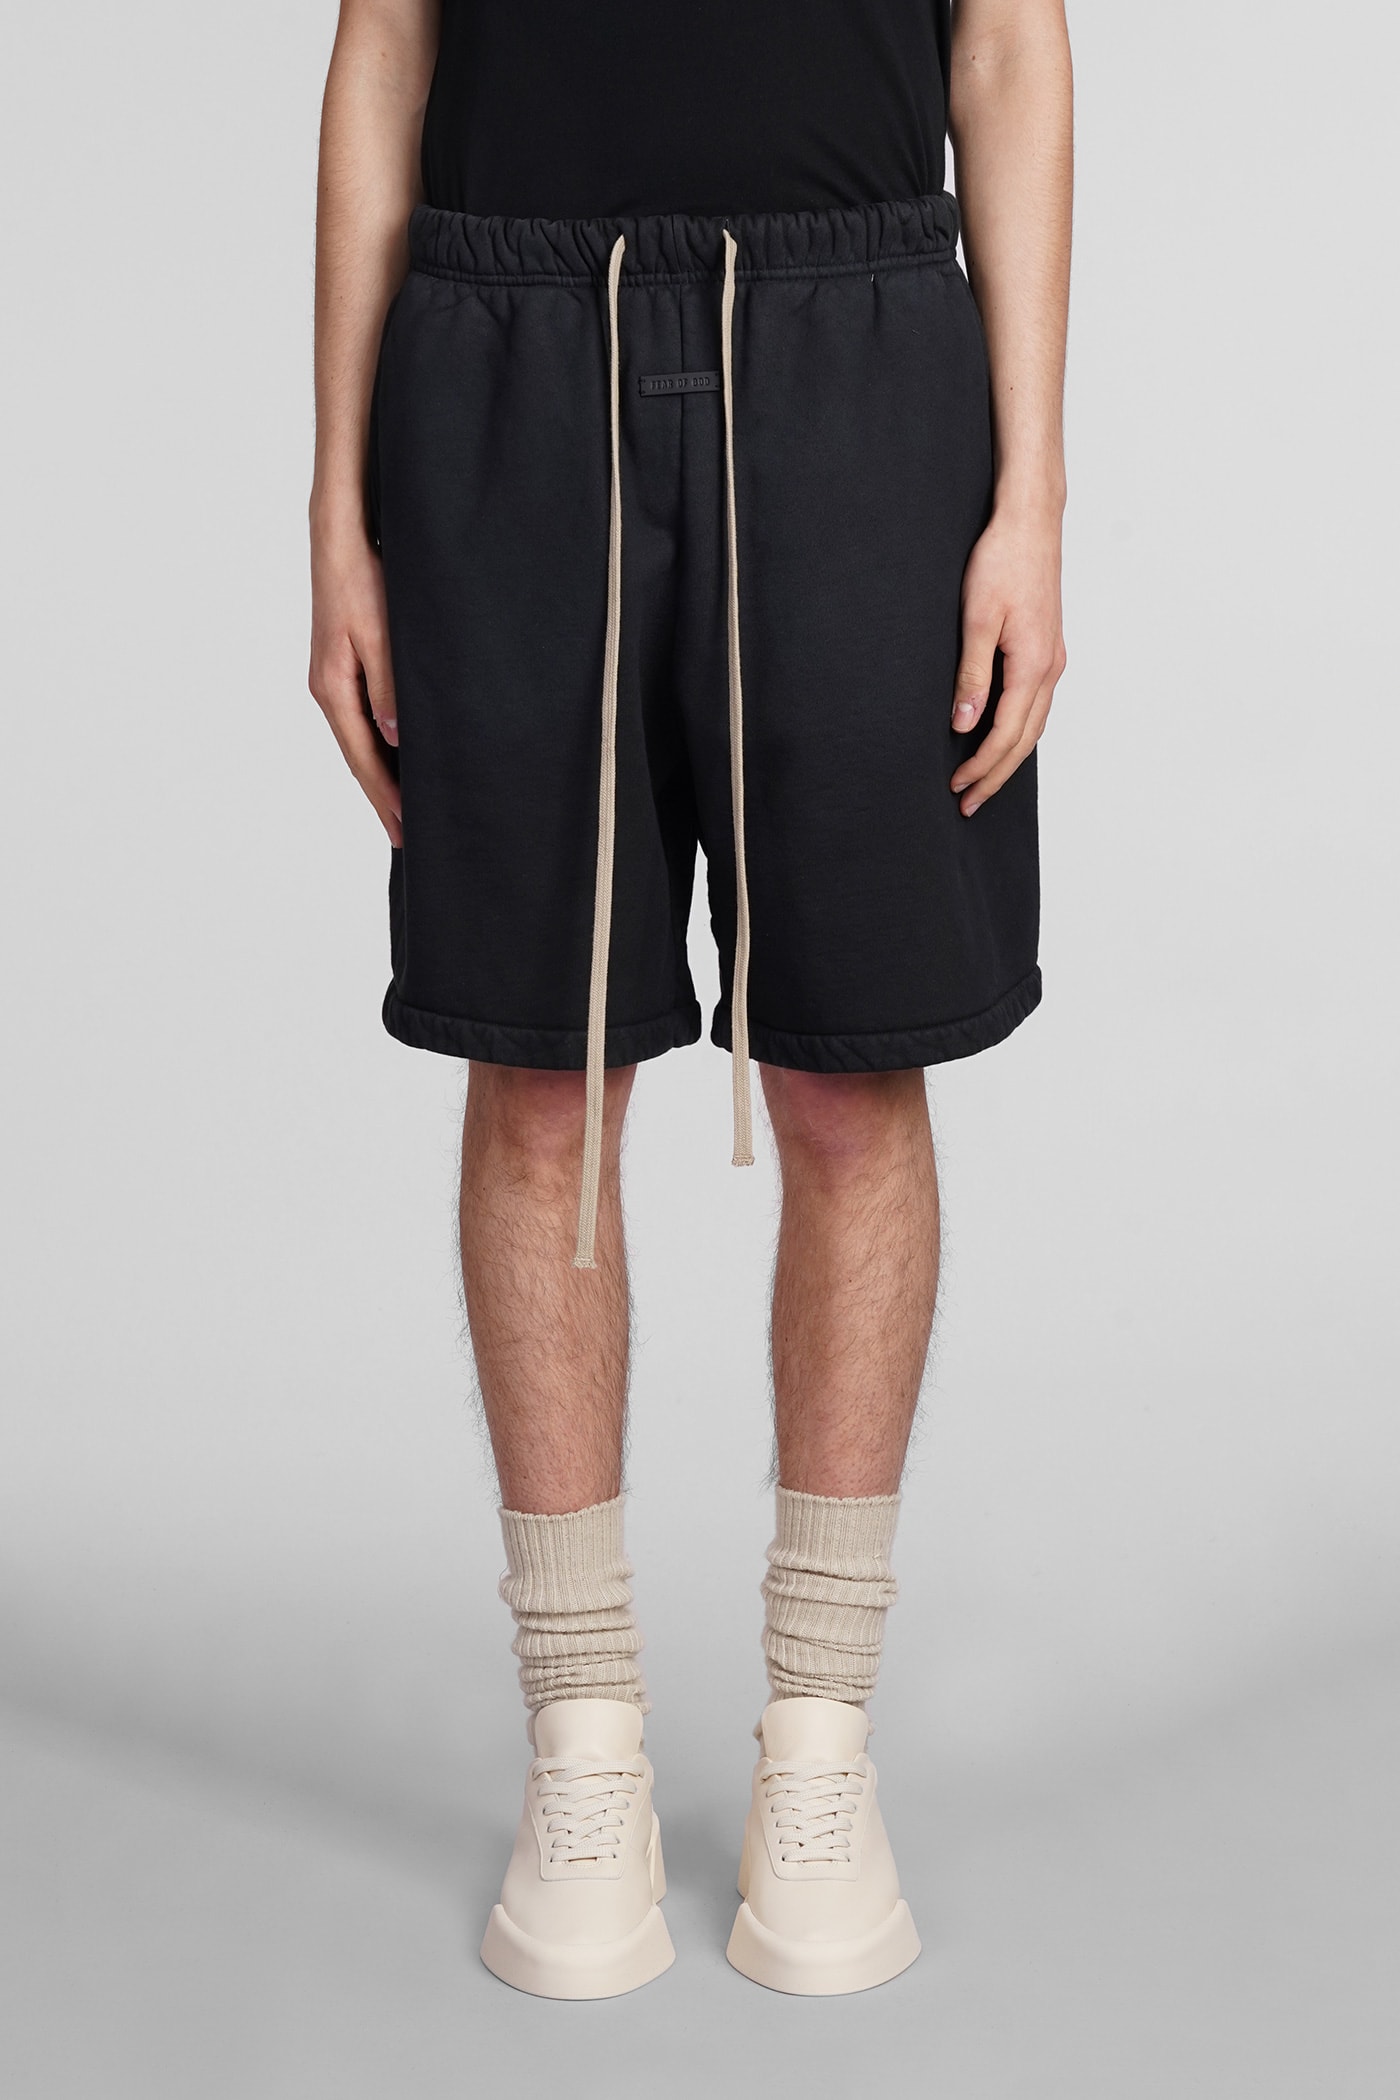 Shop Fear Of God Shorts In Black Cotton